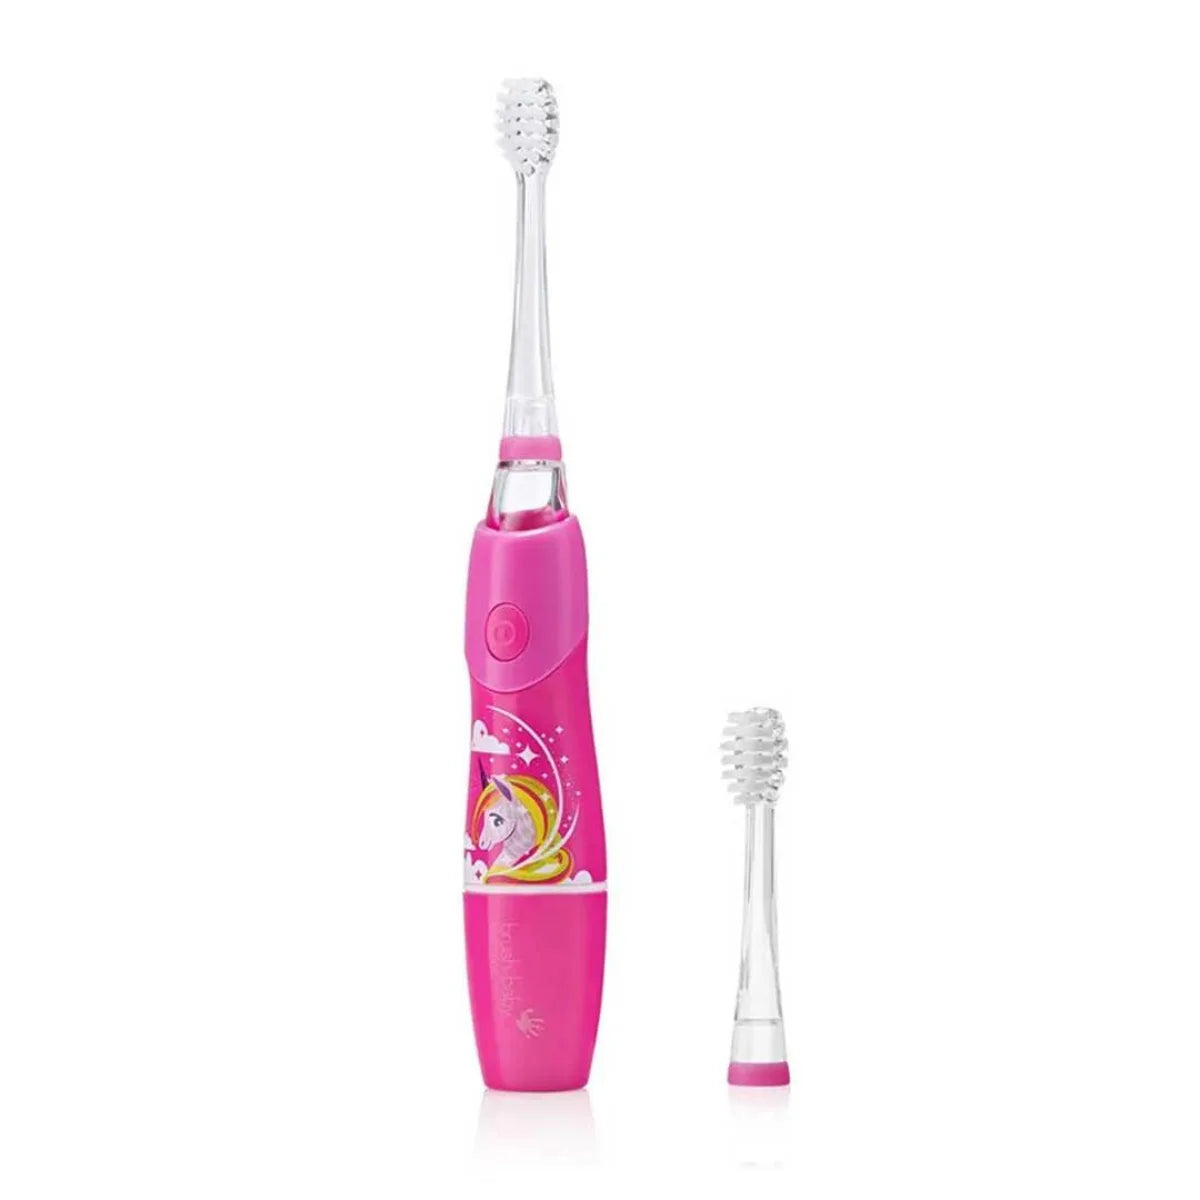 Flossy the Unicorn Kids Sonic electric battery toothbrushes